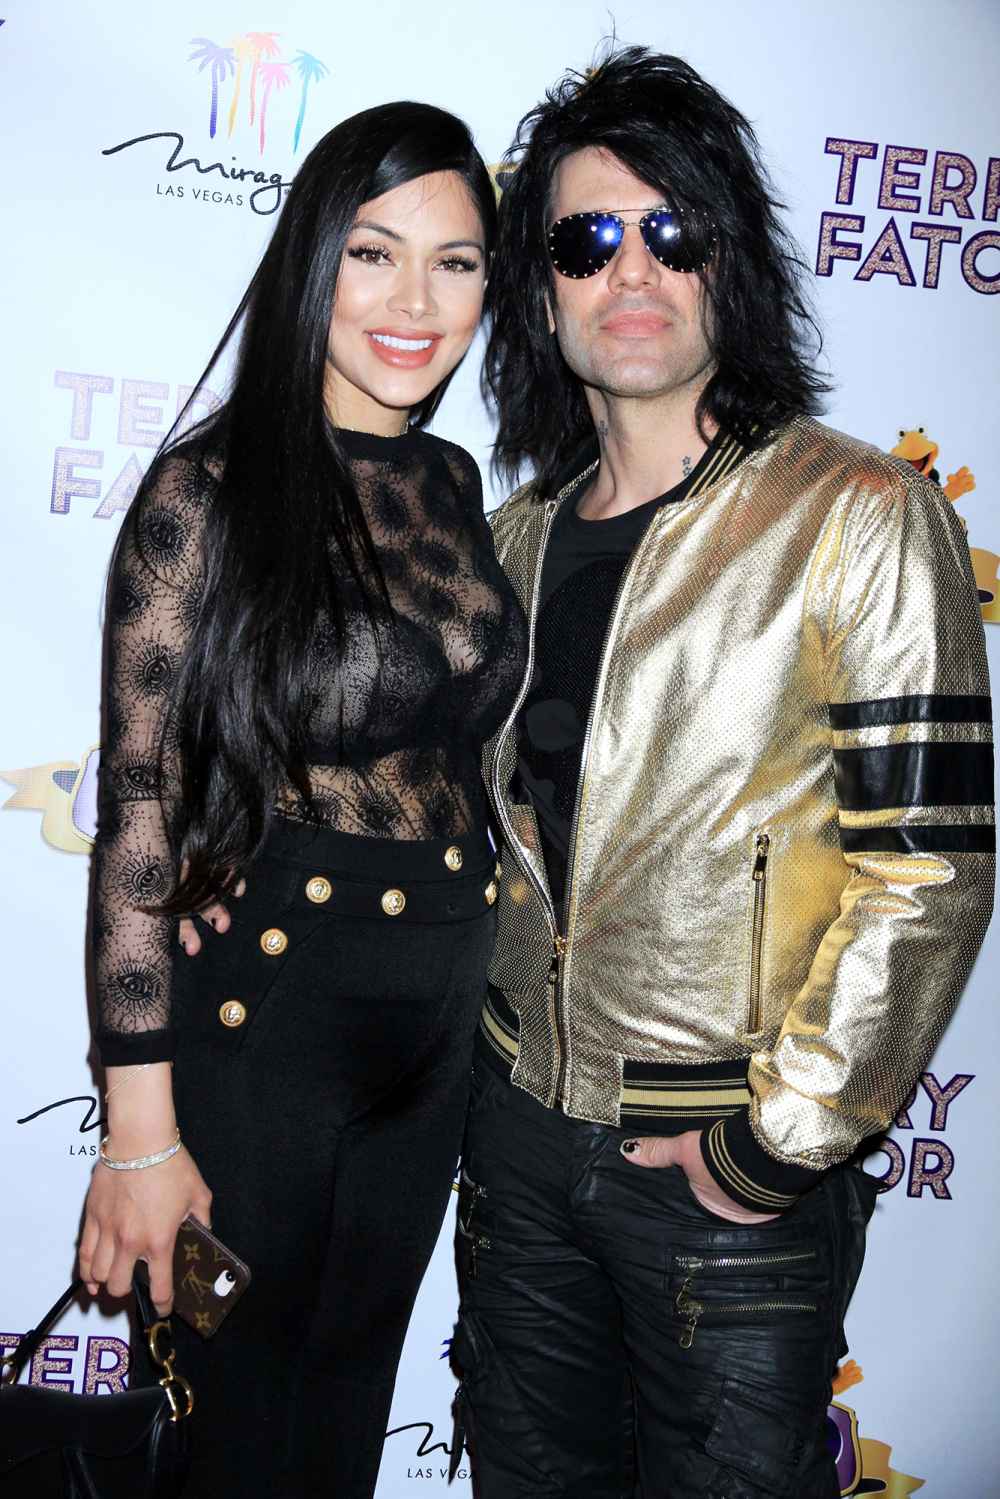 Criss Angel and Wife Shaunyl Benson Welcome Their 3rd Child